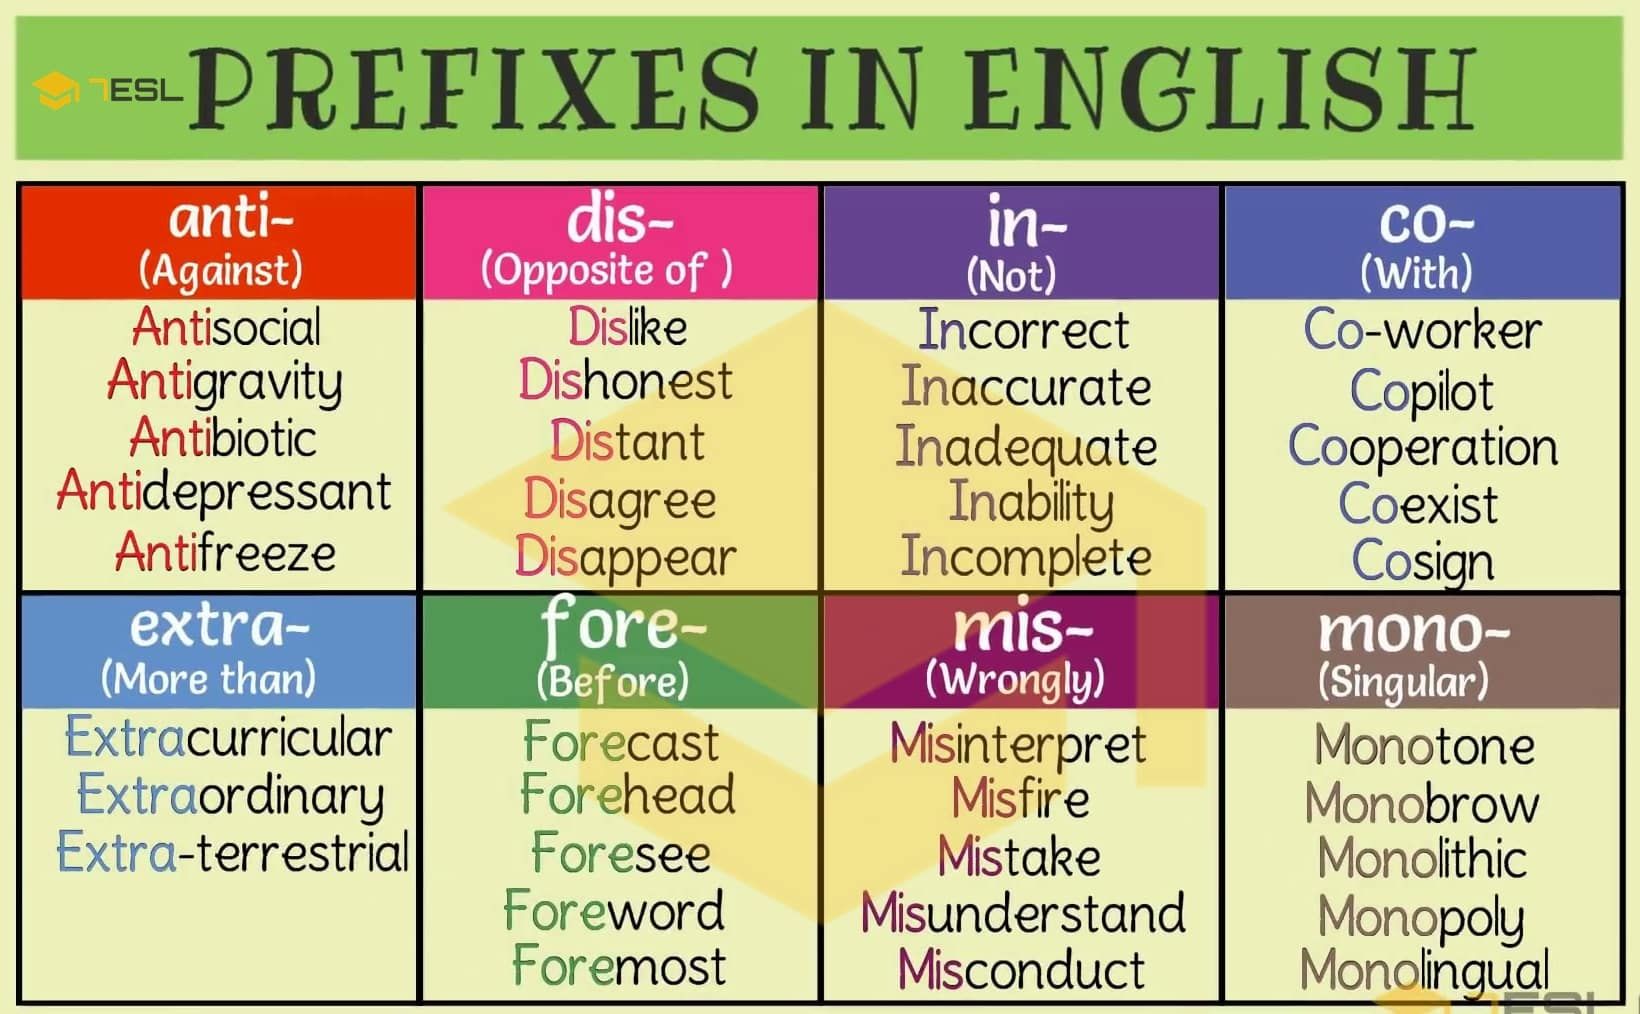 Without negative. Suffixes and prefixes in English. Prefixes в английском языке. Приставки в английском языке таблица. Prefixes in English таблица.